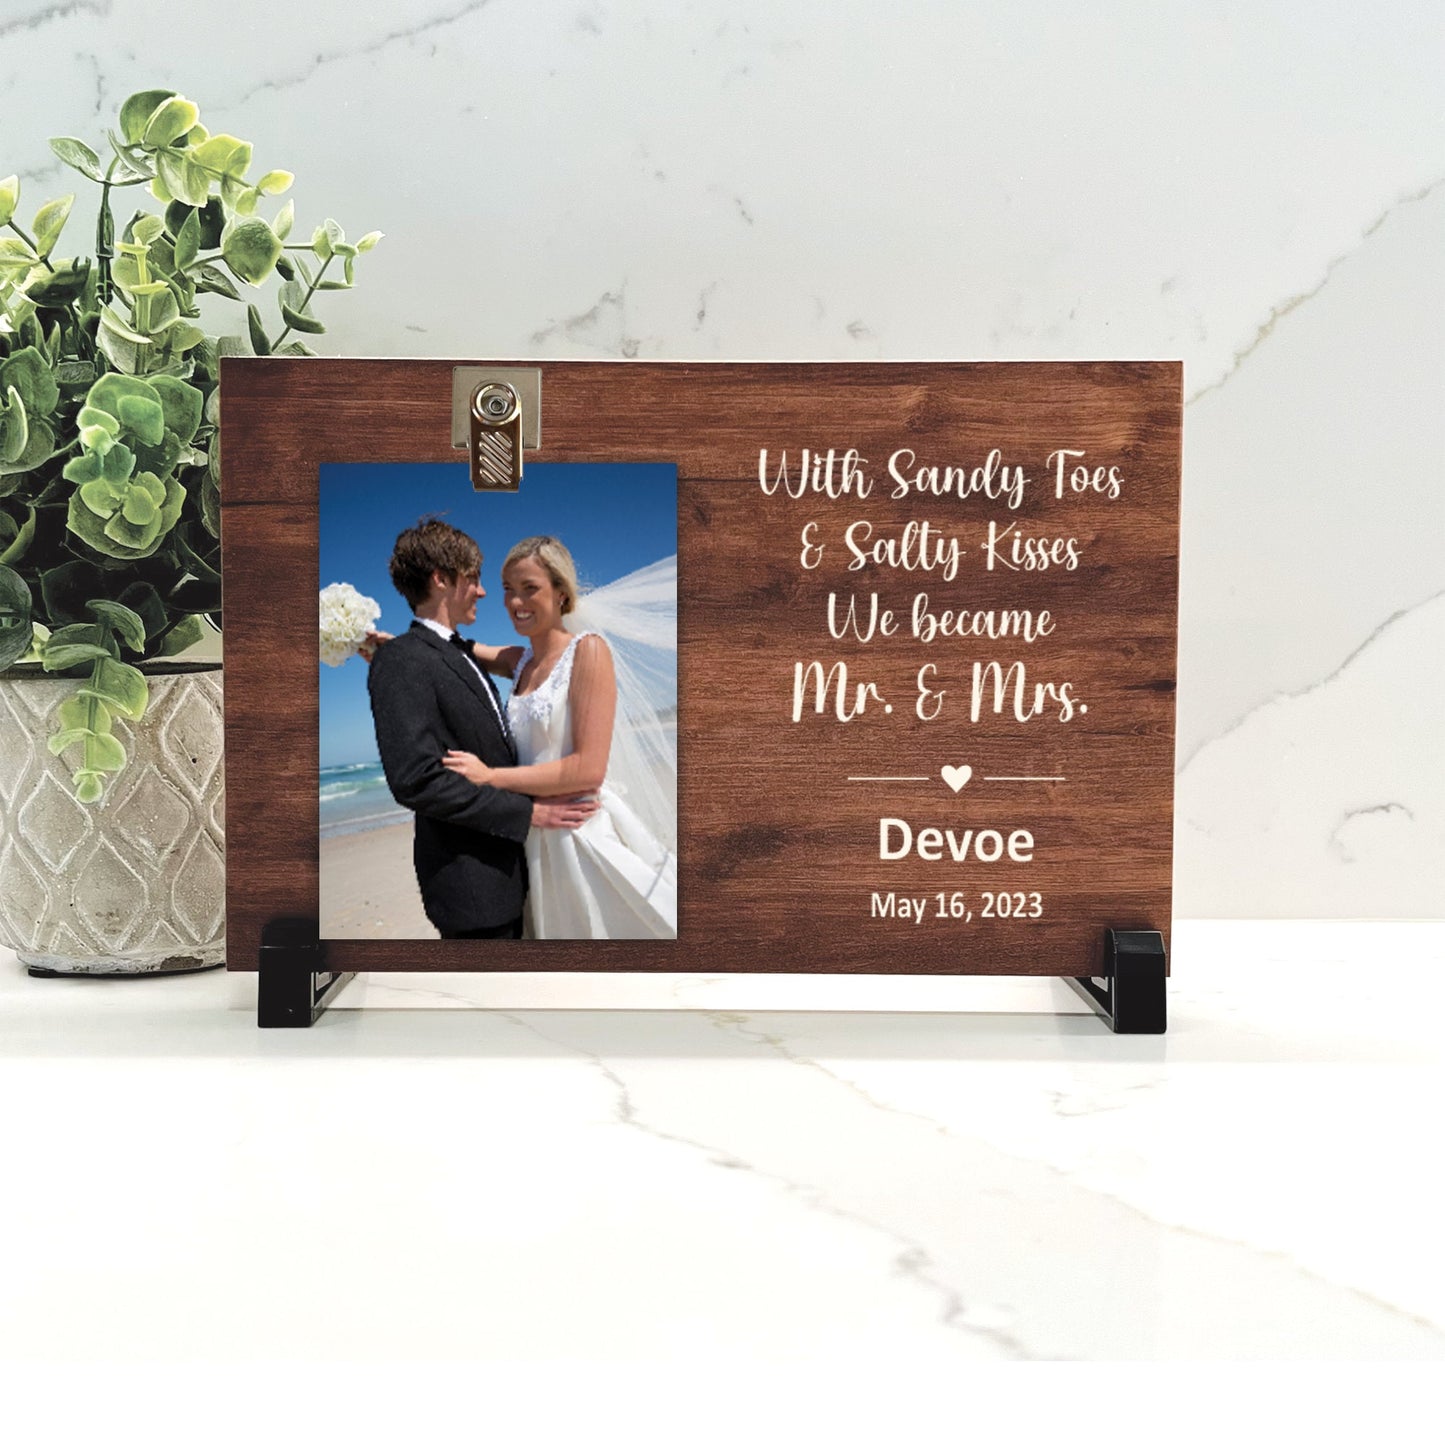 Customize your cherished moments with our Wedding Personalized Picture Frame available at www.florida-funshine.com. Create a heartfelt gift for family and friends with free personalization, quick shipping in 1-2 business days, and quality crafted picture frames, portraits, and plaques made in the USA."